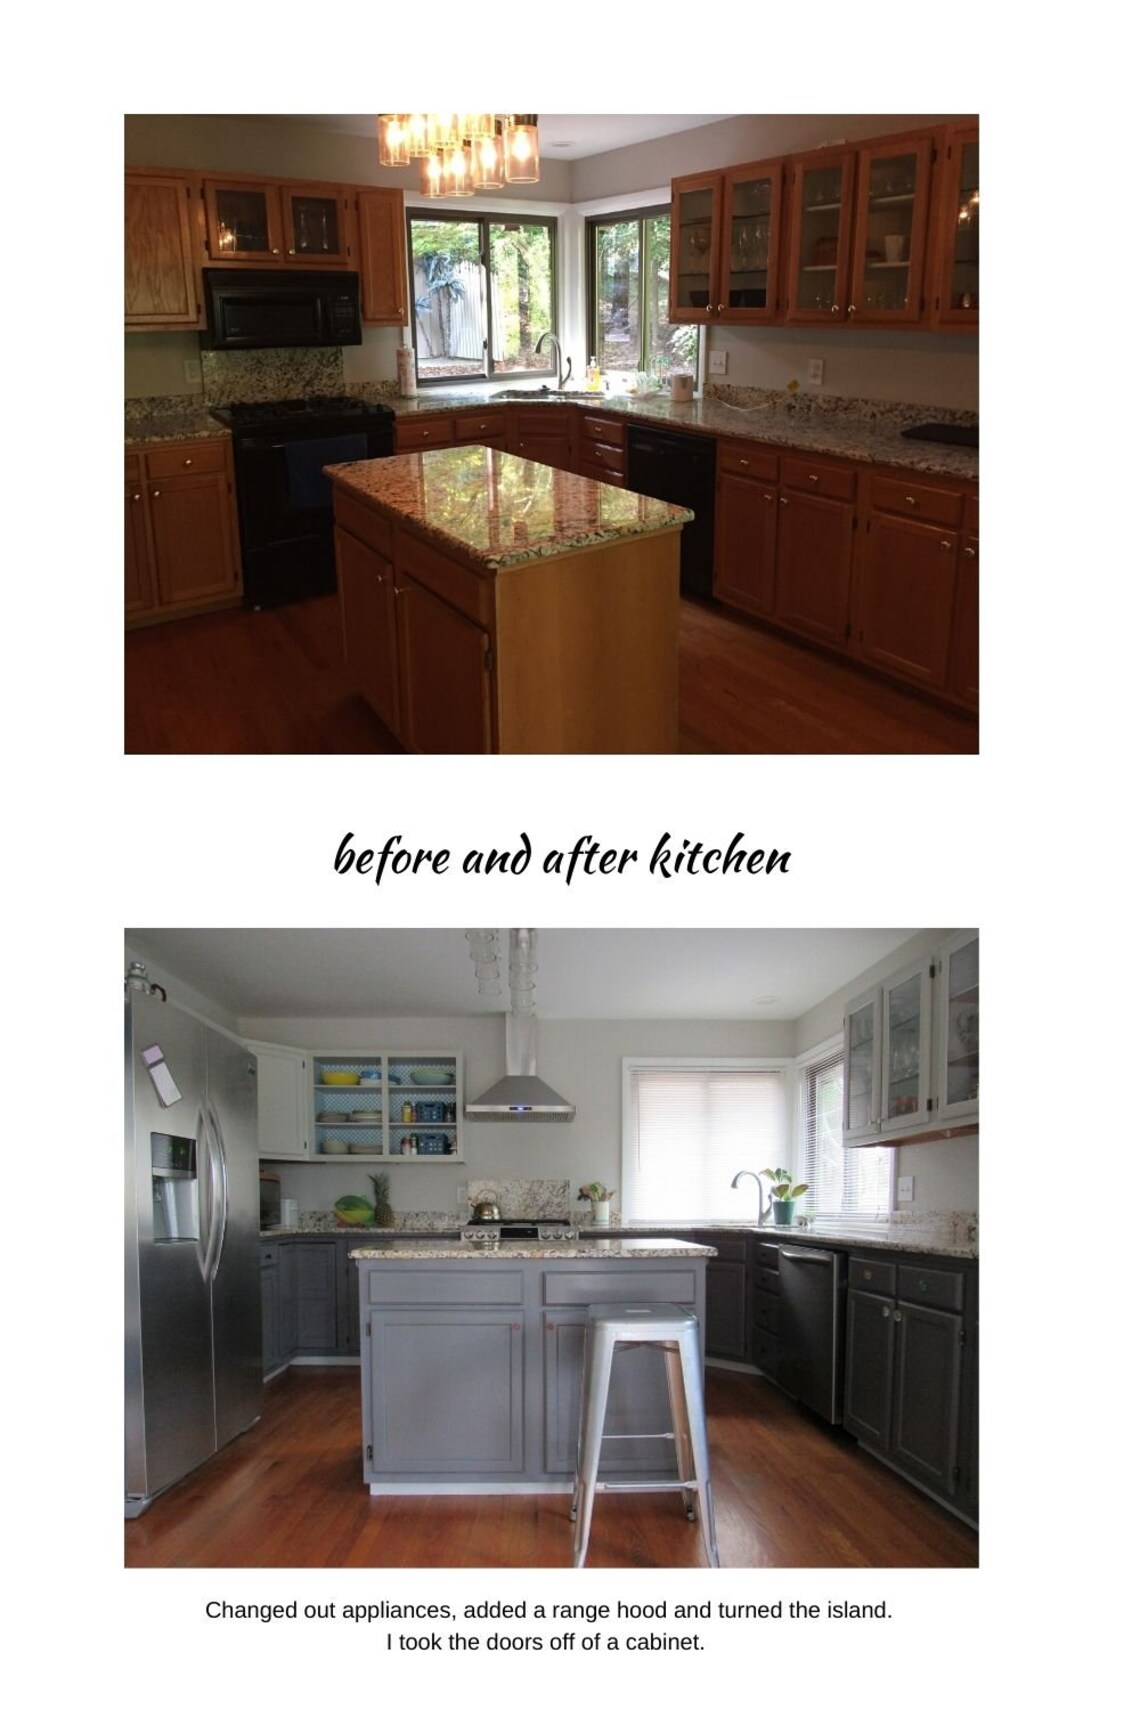 10 Easy Tips to Make Your Kitchen Look Stunning - Etsy